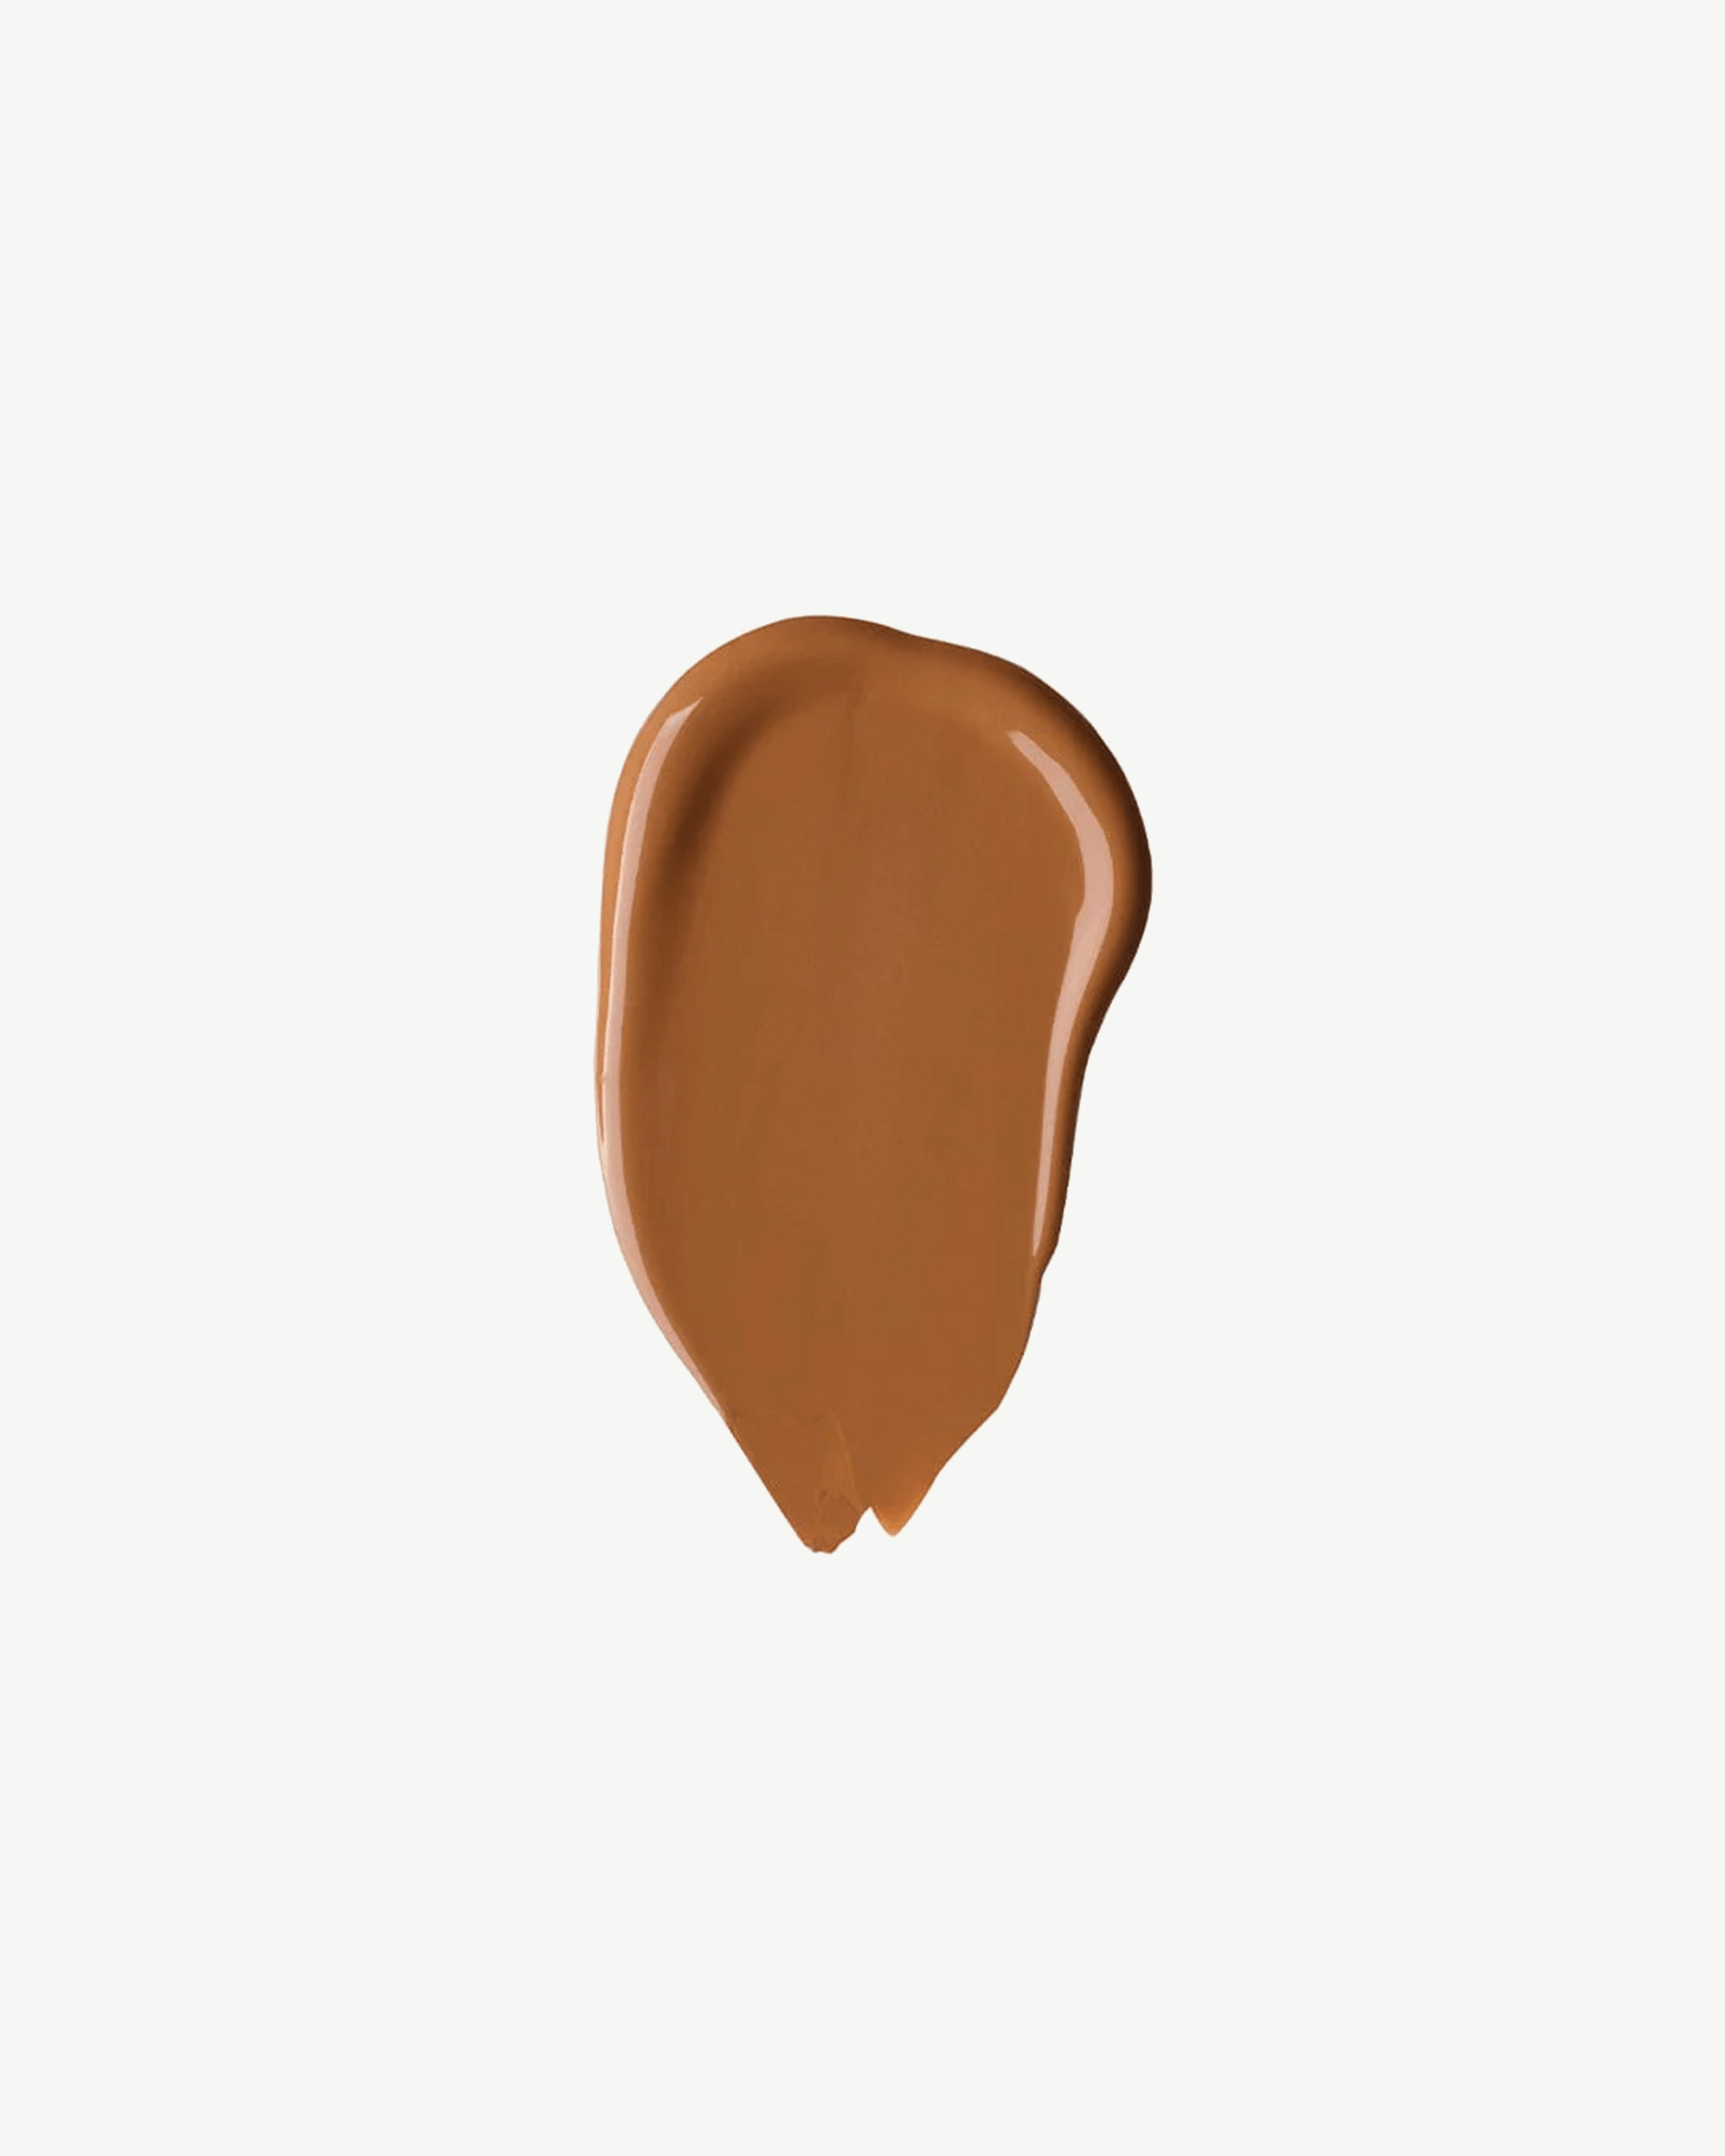 Shade 12 (for deep skin tones with neutral undertones)